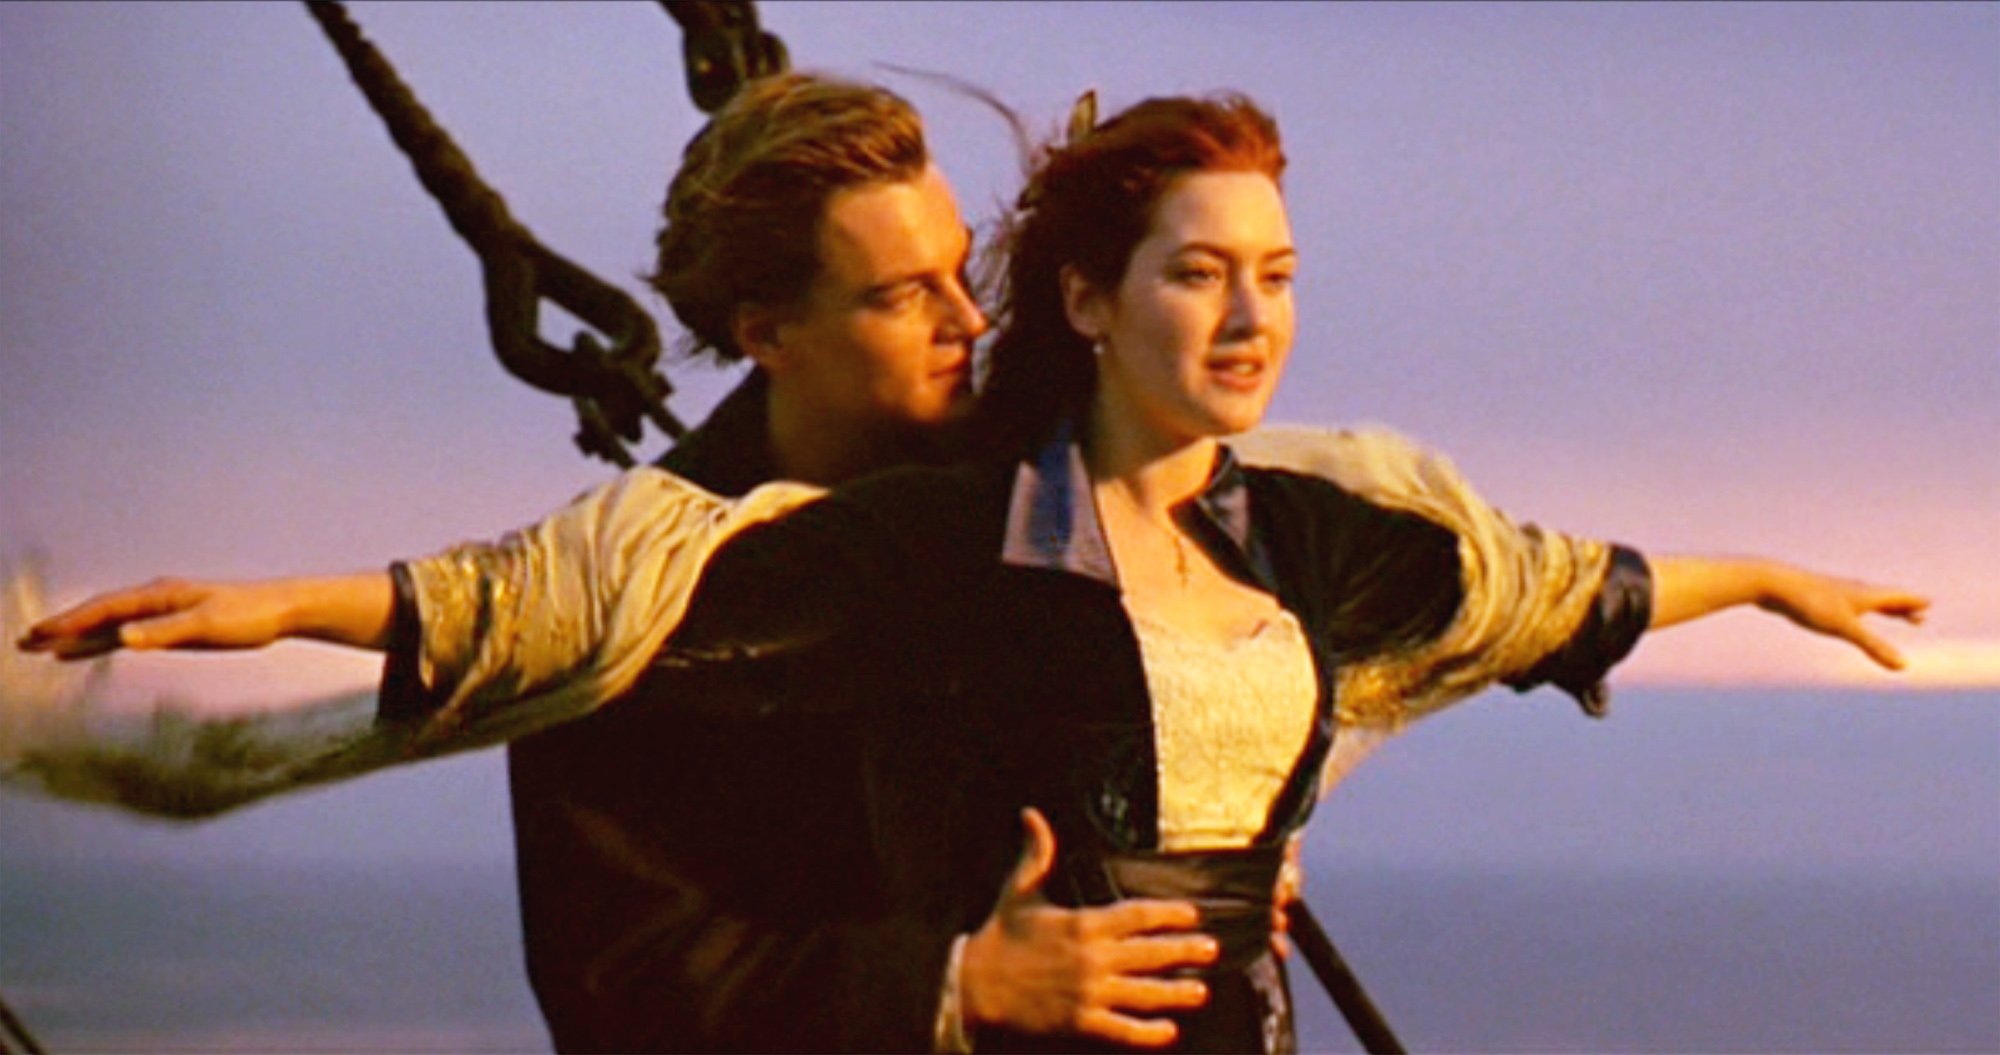 Titanic': Was Jack Dawson an Actual Passenger on the Real Titanic?